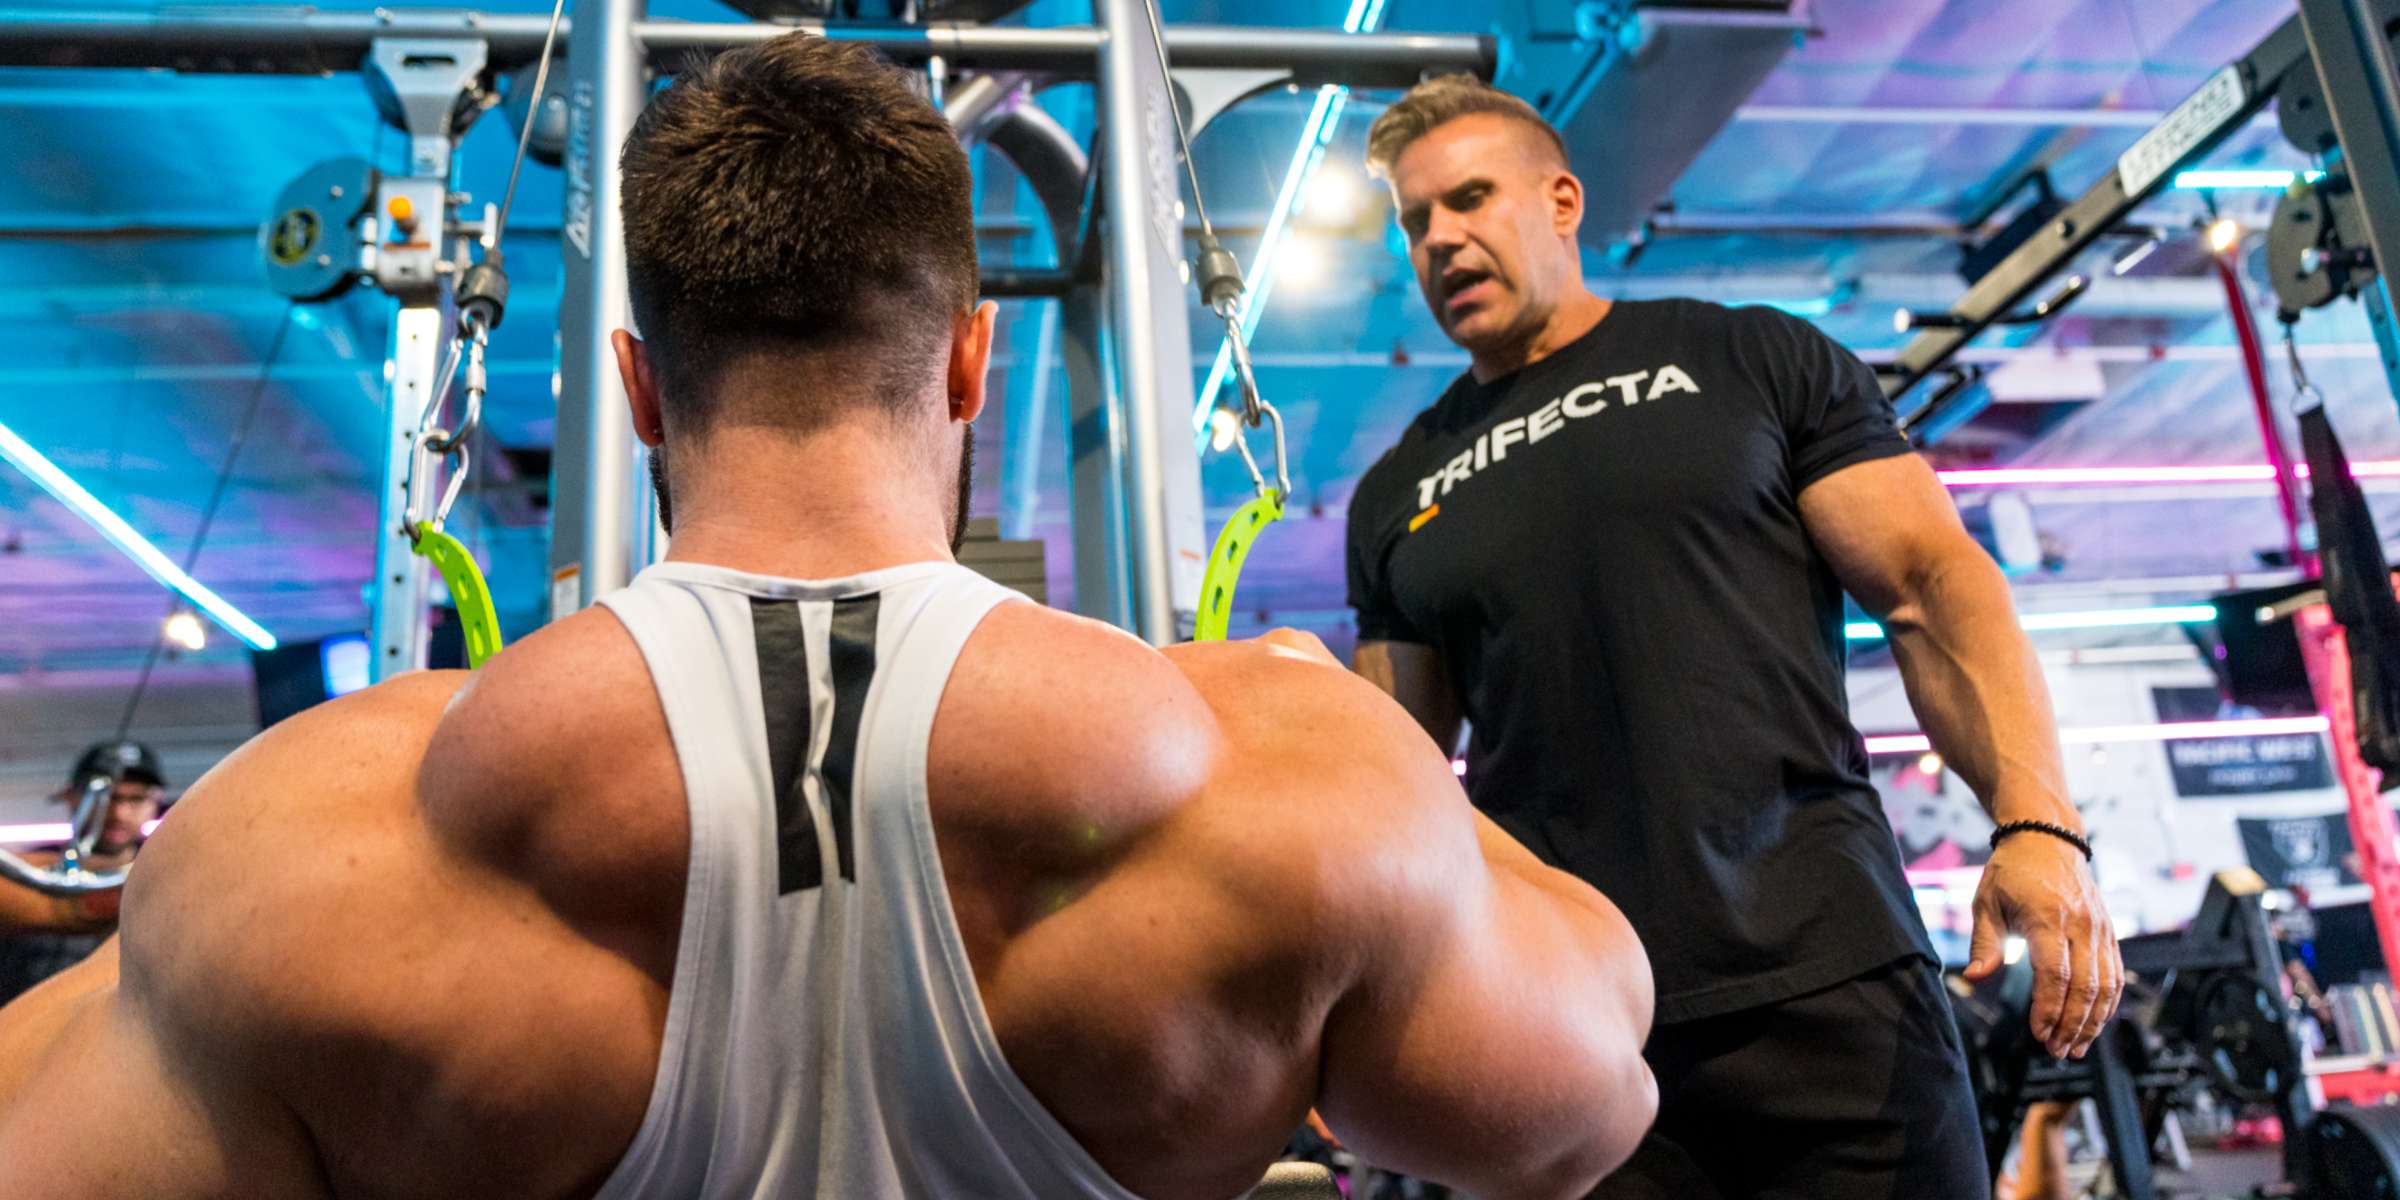 The 5×5 workout explained: Ways to build size and strength